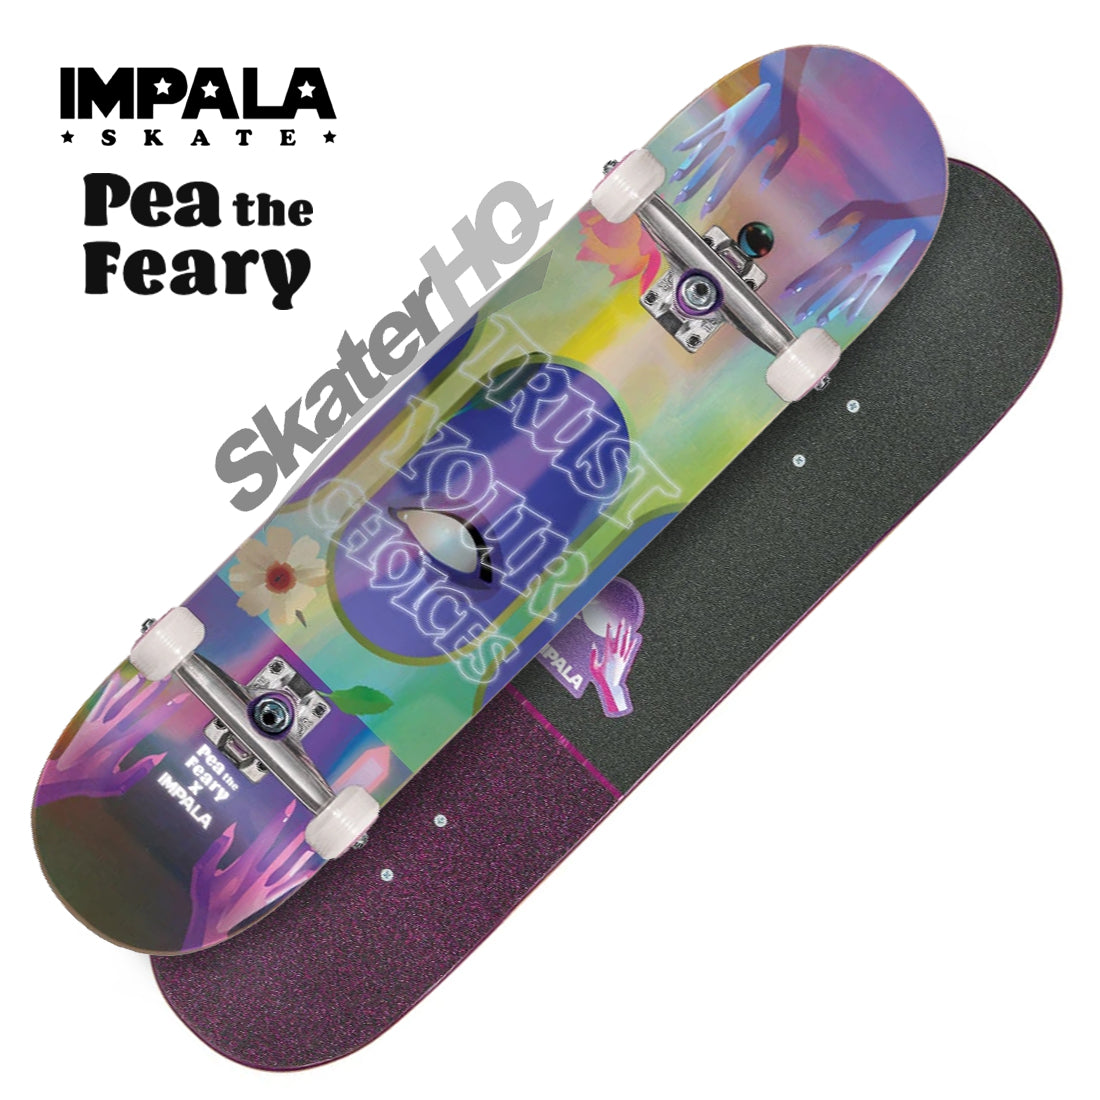 Impala Mystic Pea The Feary 8.0 Complete - Holographic Skateboard Completes Modern Street